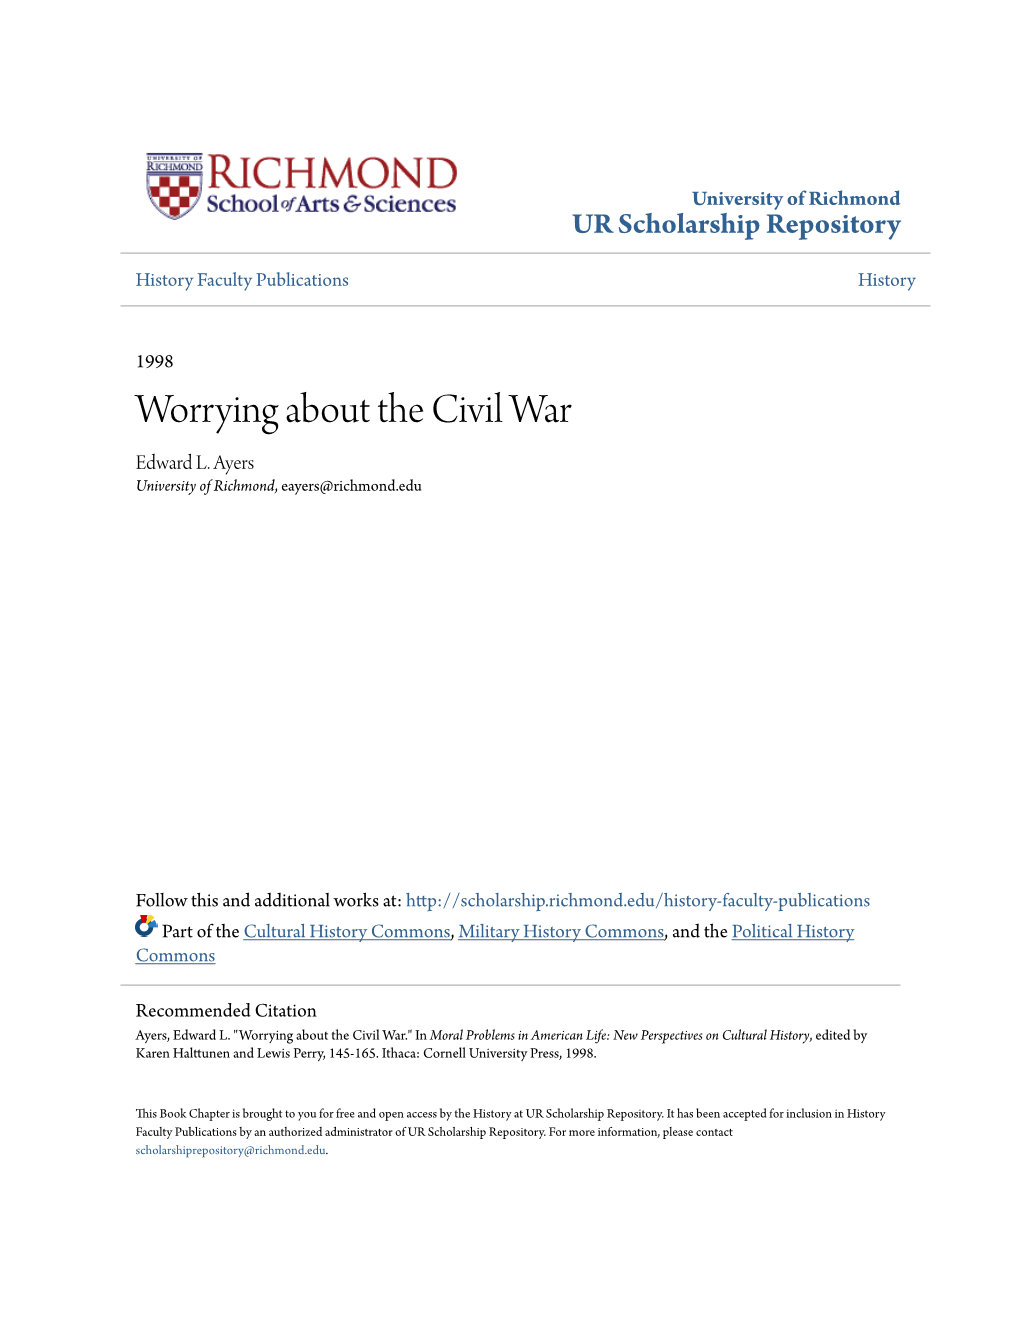 Worrying About the Civil War Edward L